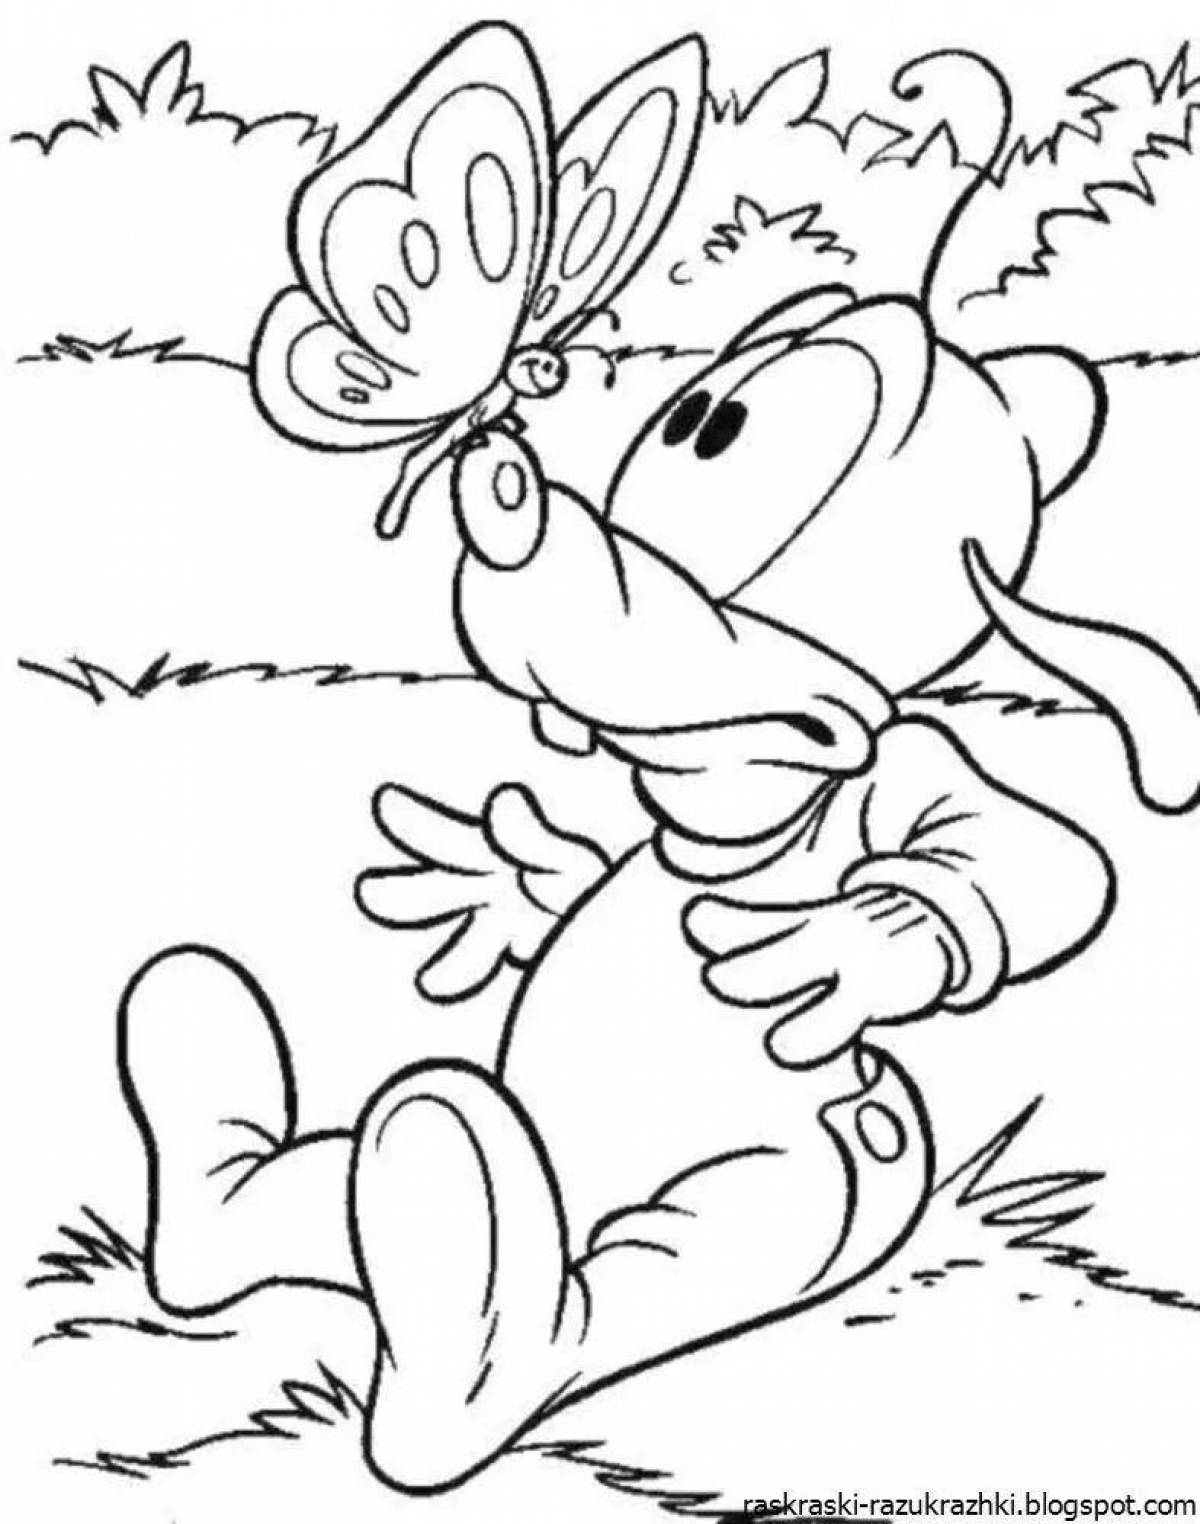 Coloring page of outstanding cartoon characters for 4-5 year olds